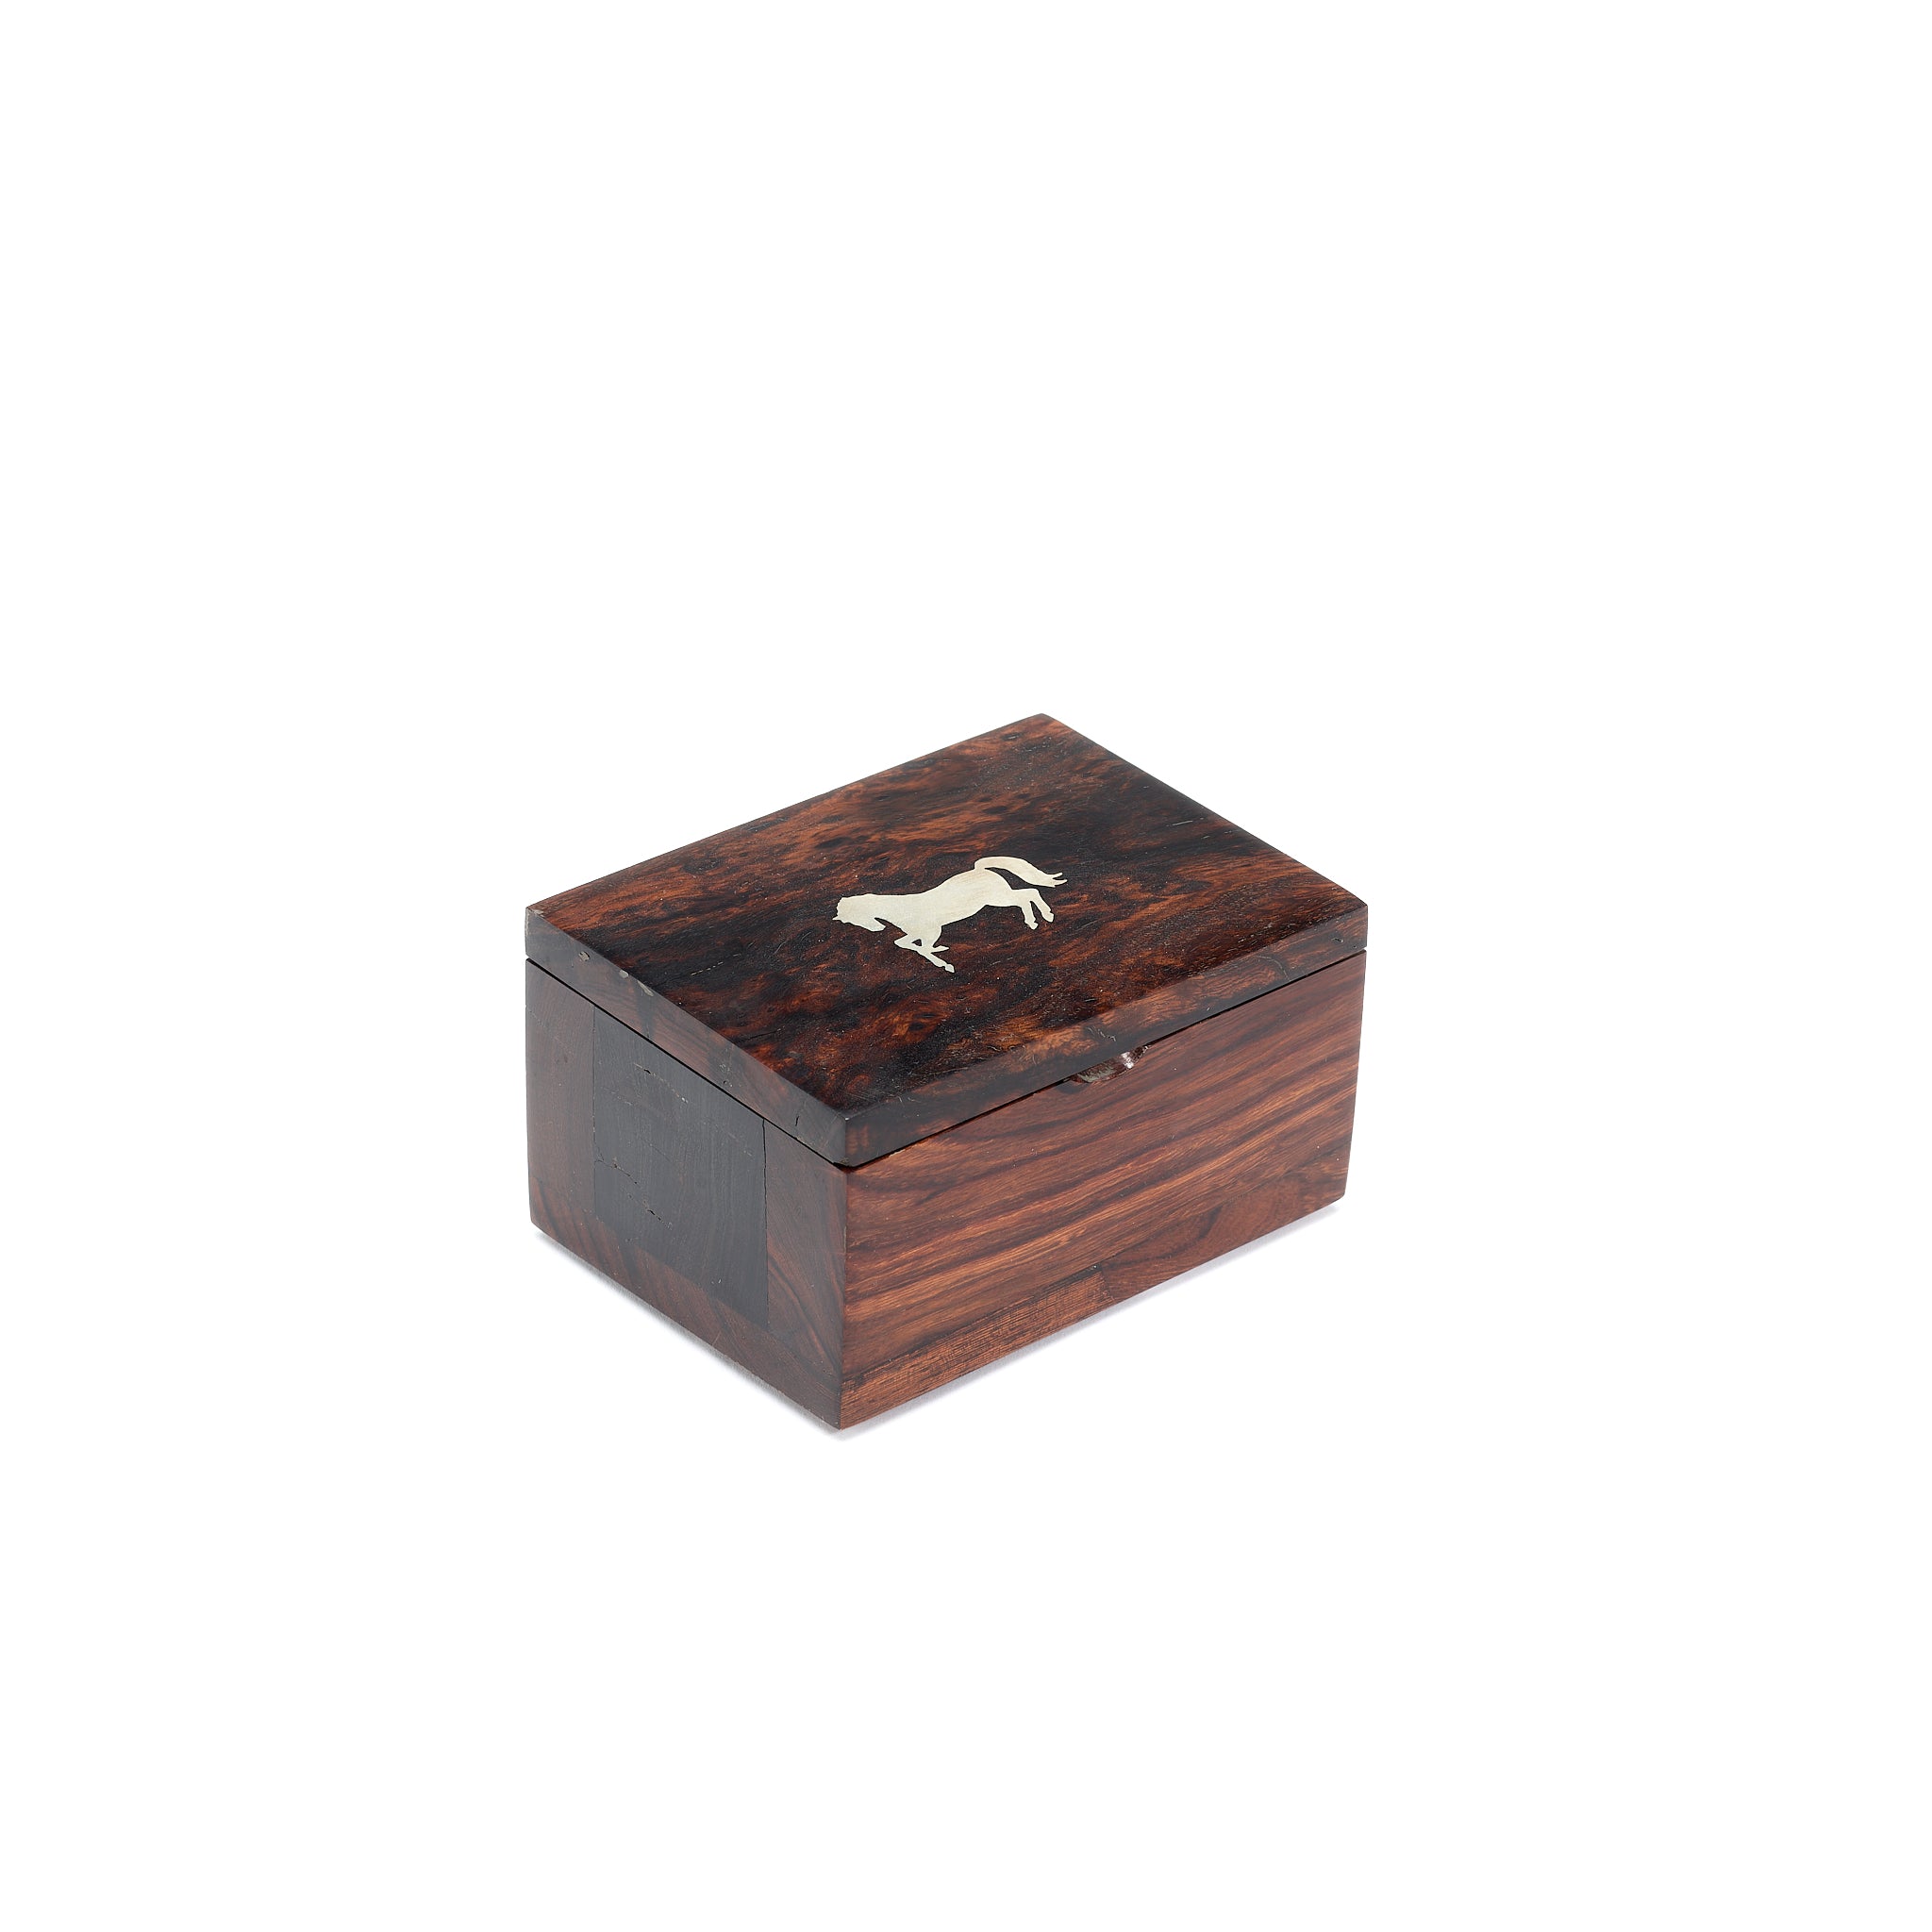 Ironwood Box with Silver Horse and Howlite Accents